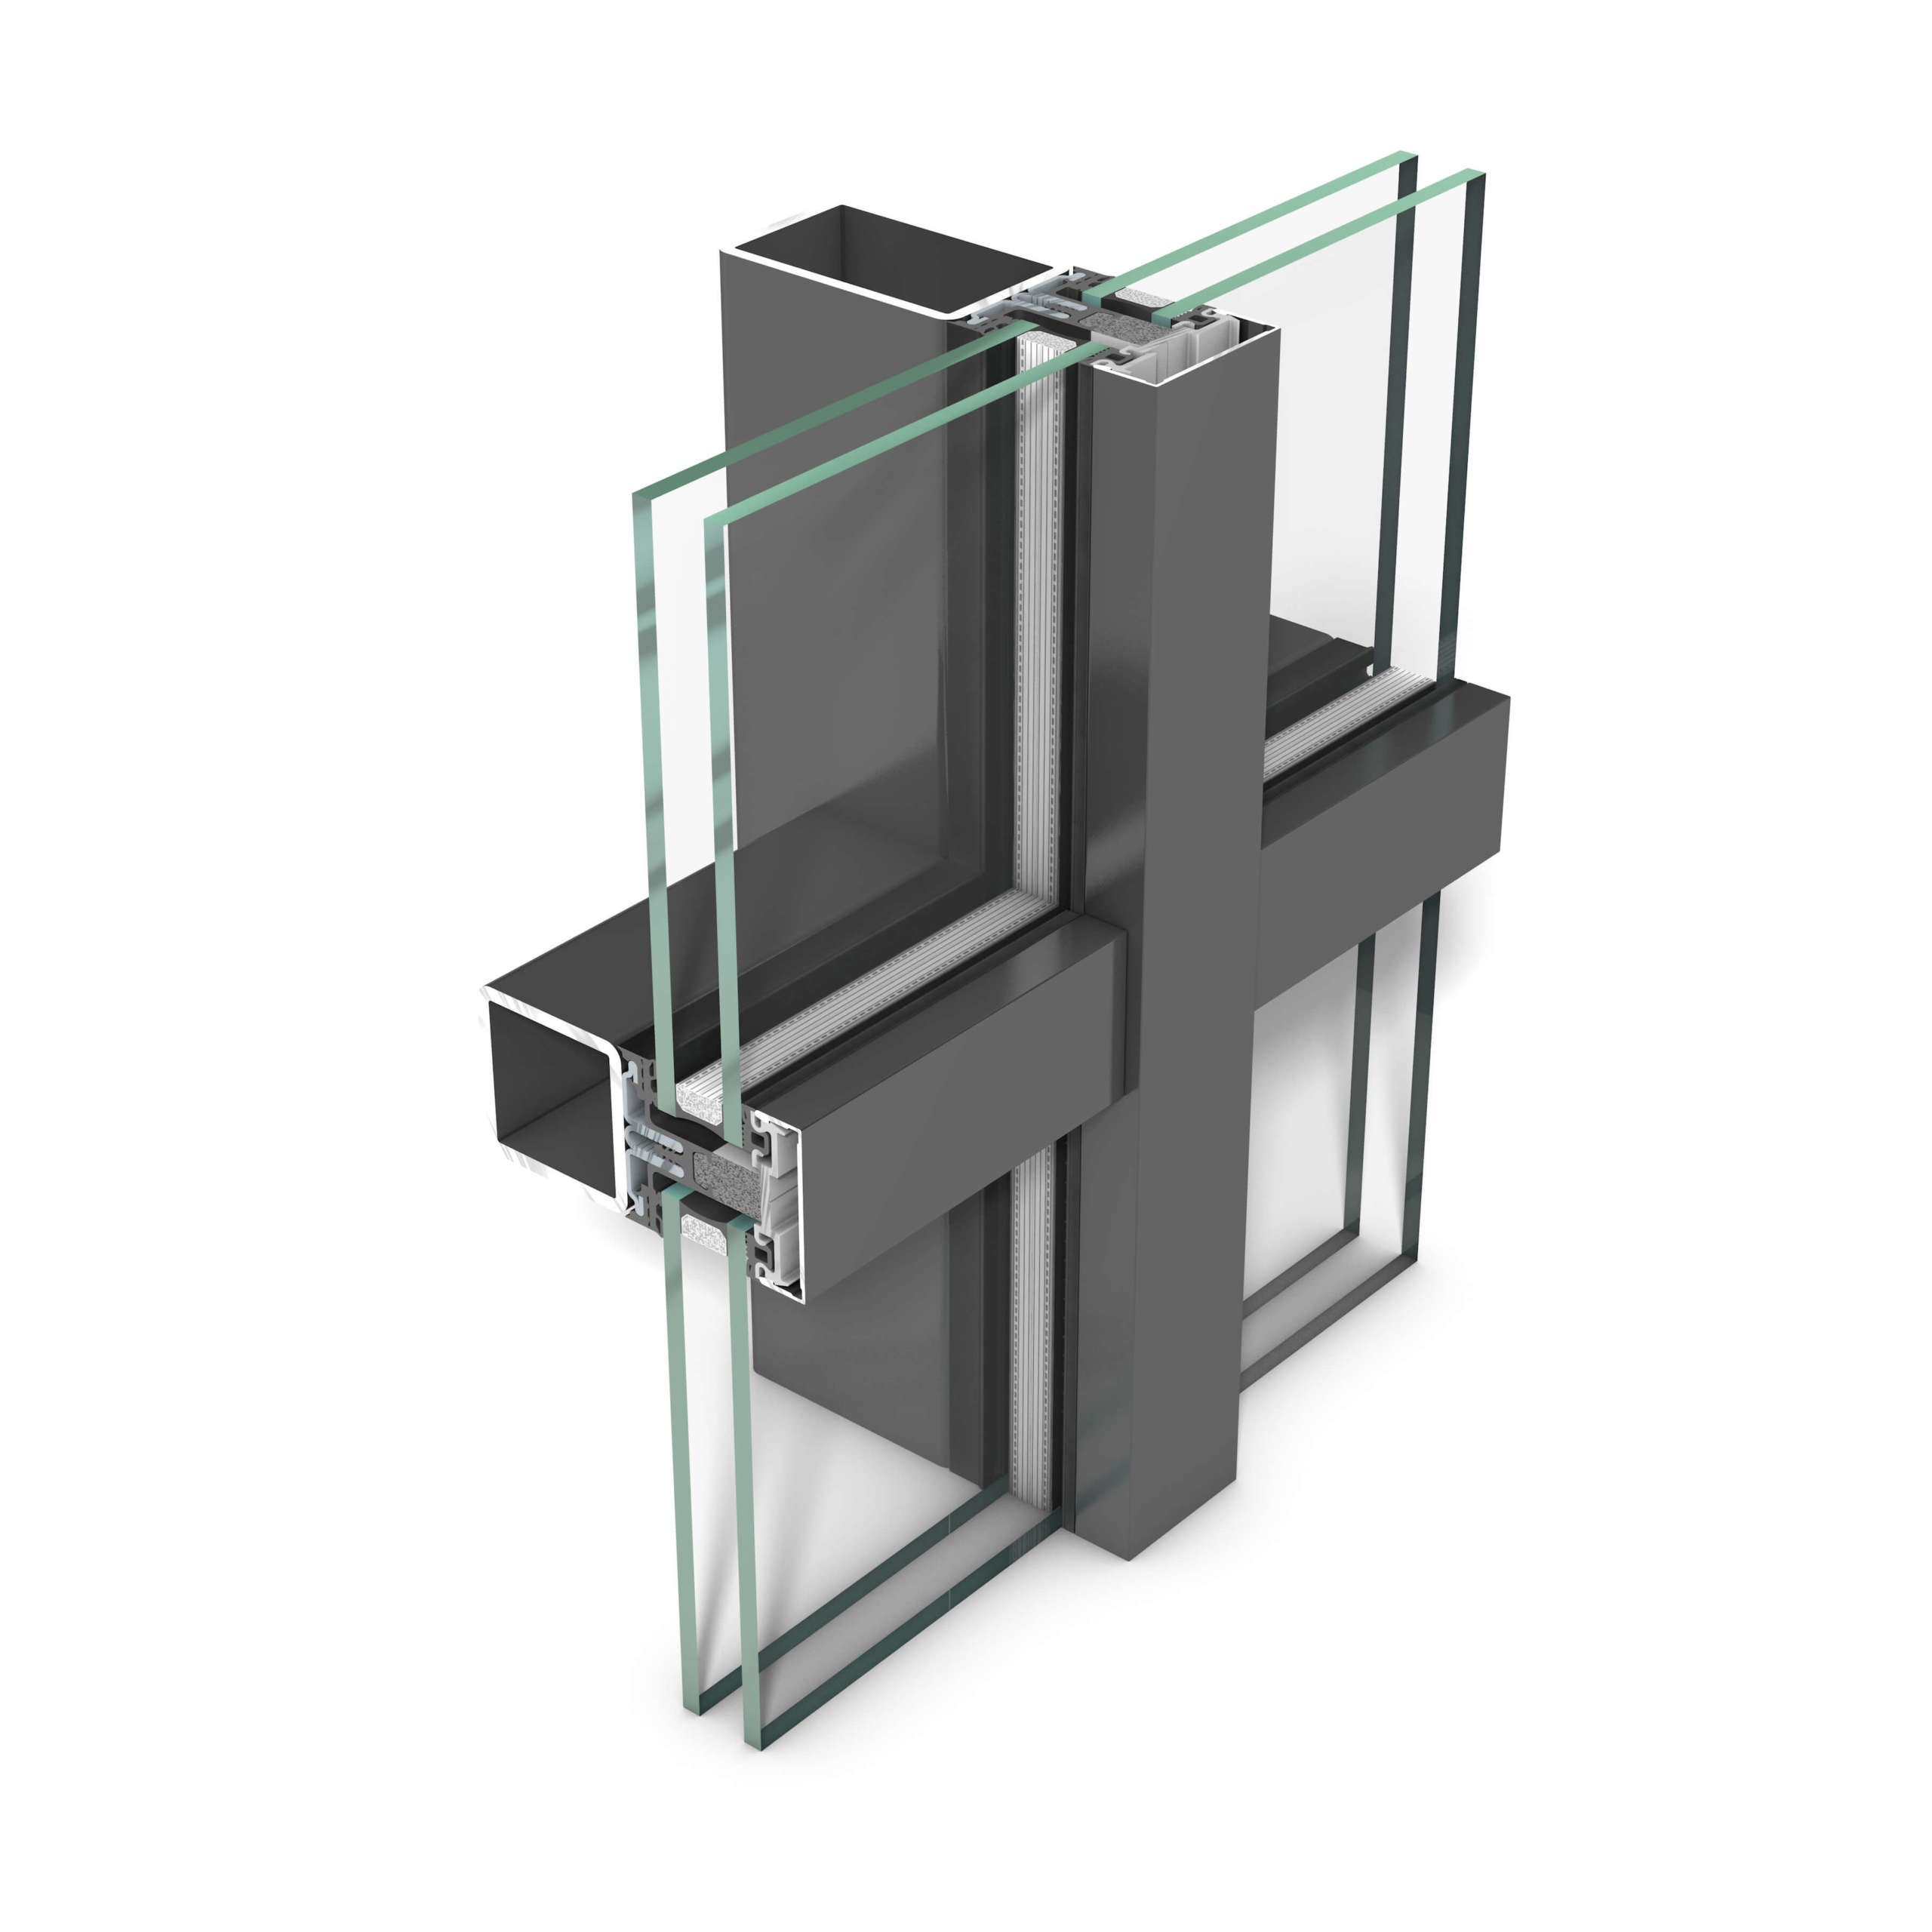 rp tec 50-1, add-on curtain wall of mullion-transom design for passive building requirements